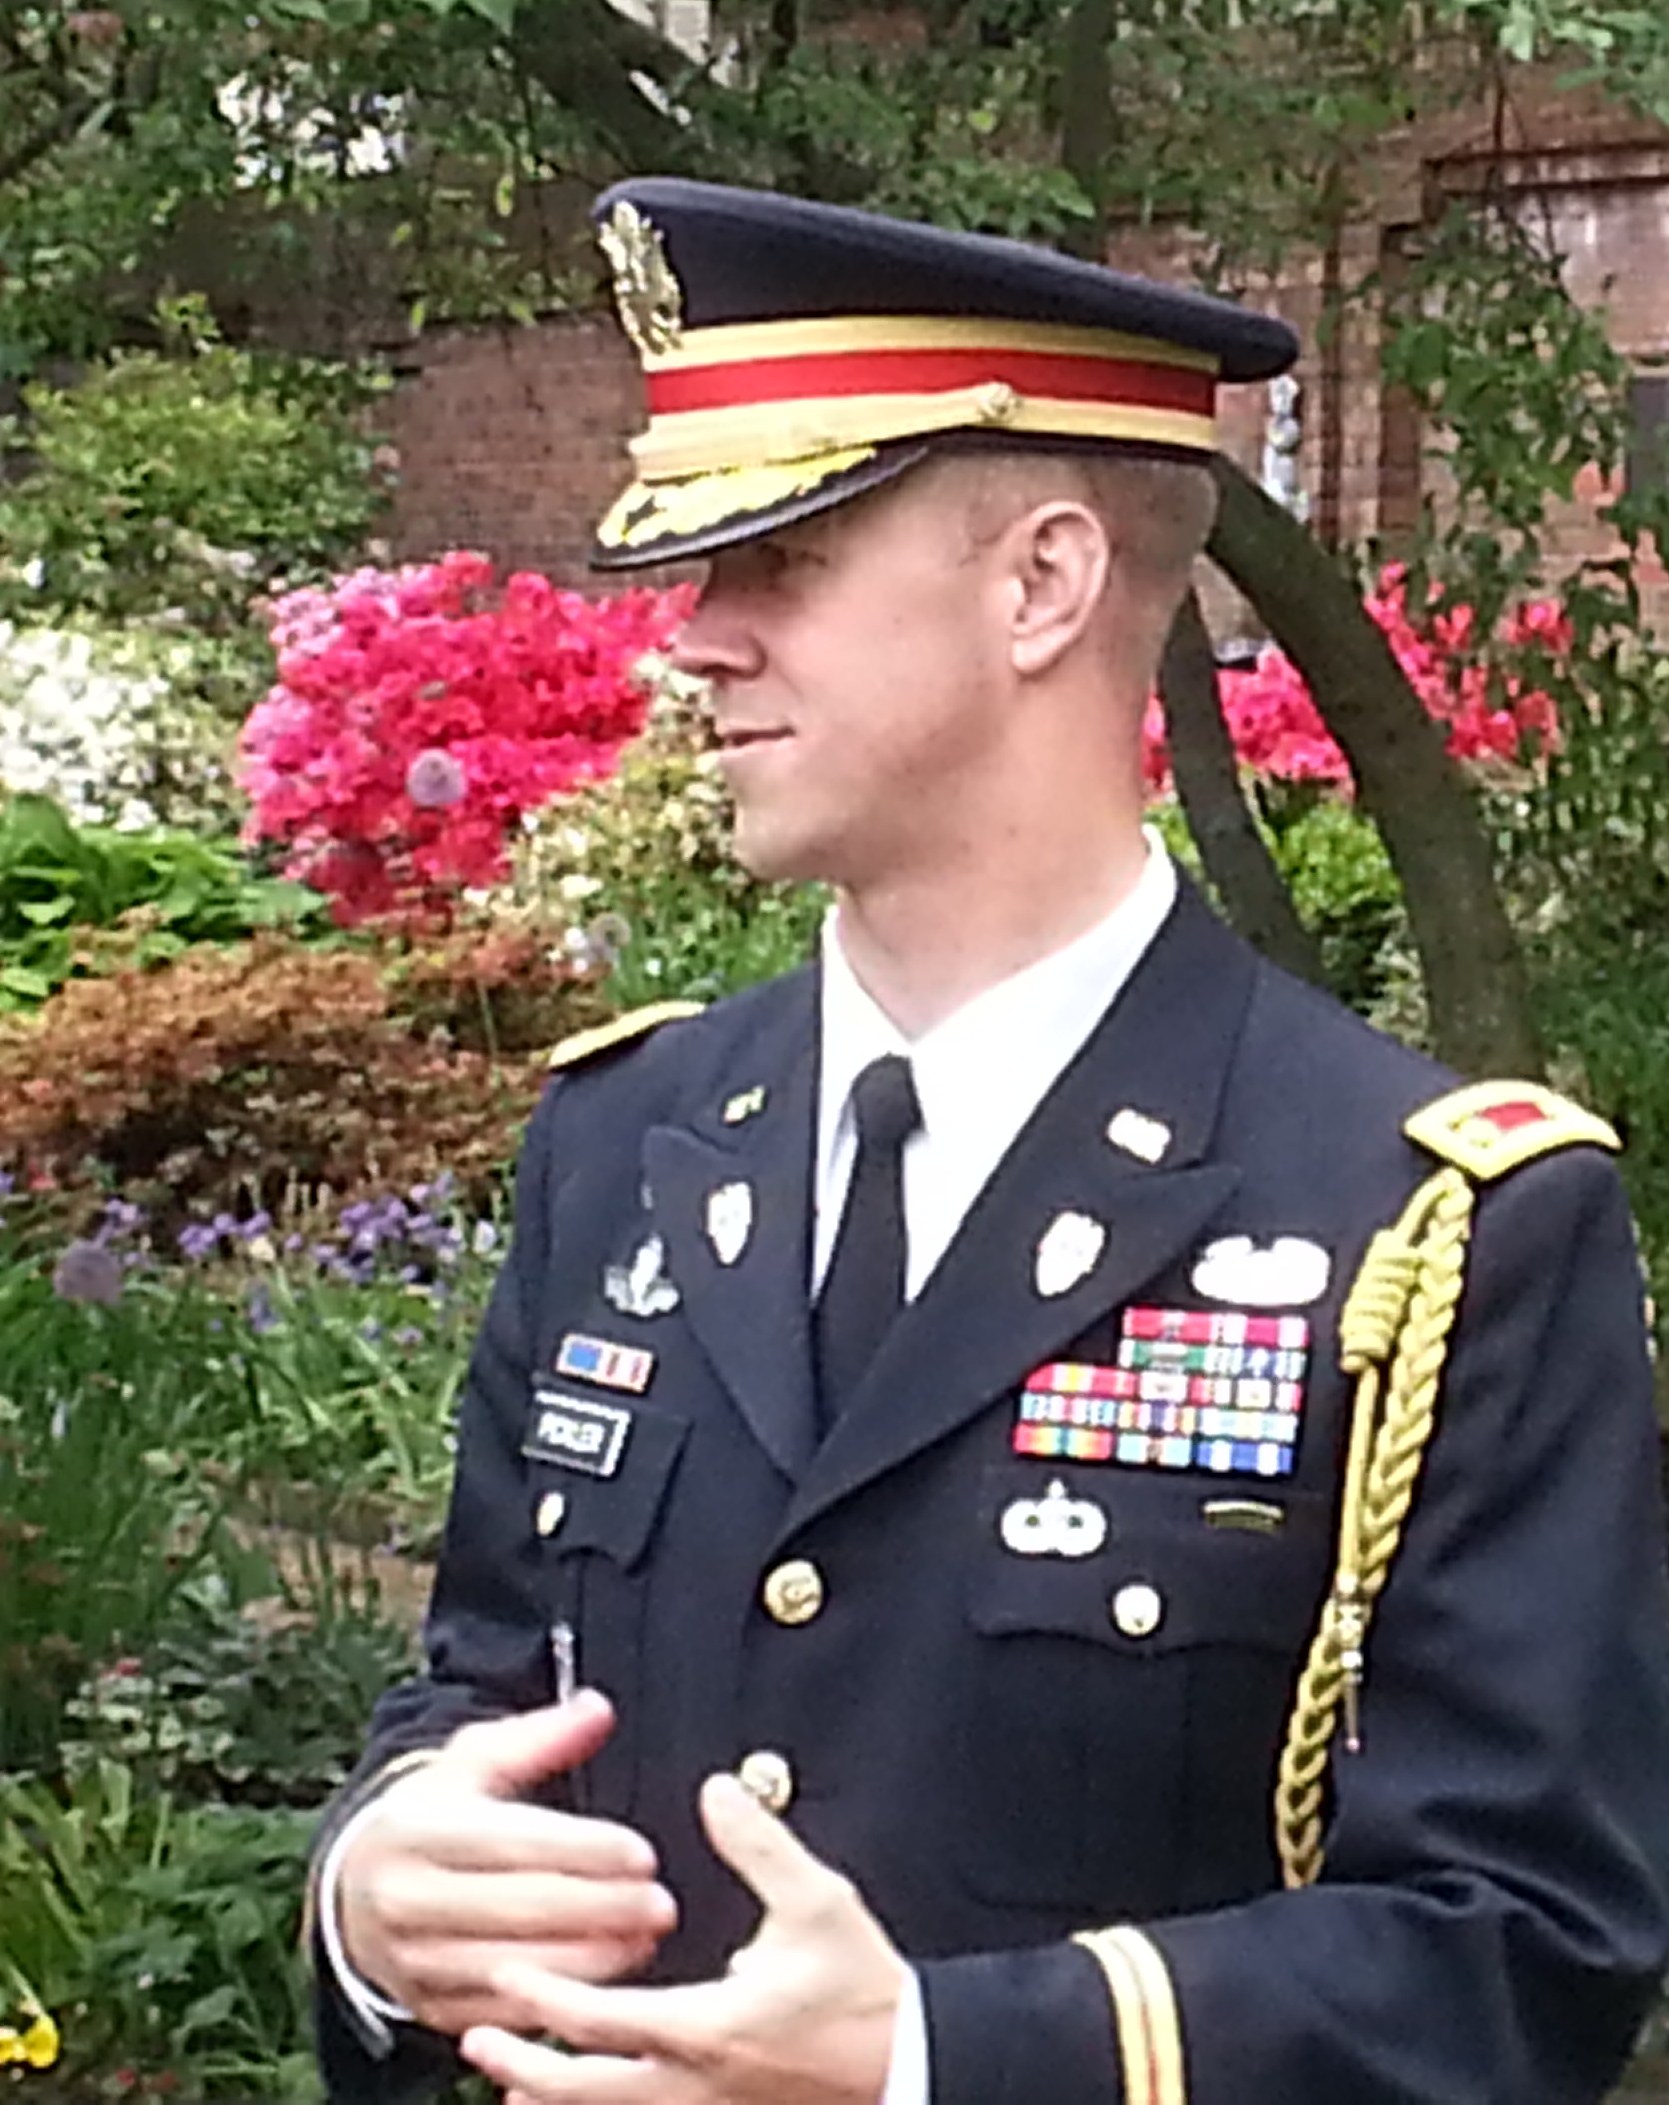 MAJ Pickler, while describing the 8th Army value (Christianity)